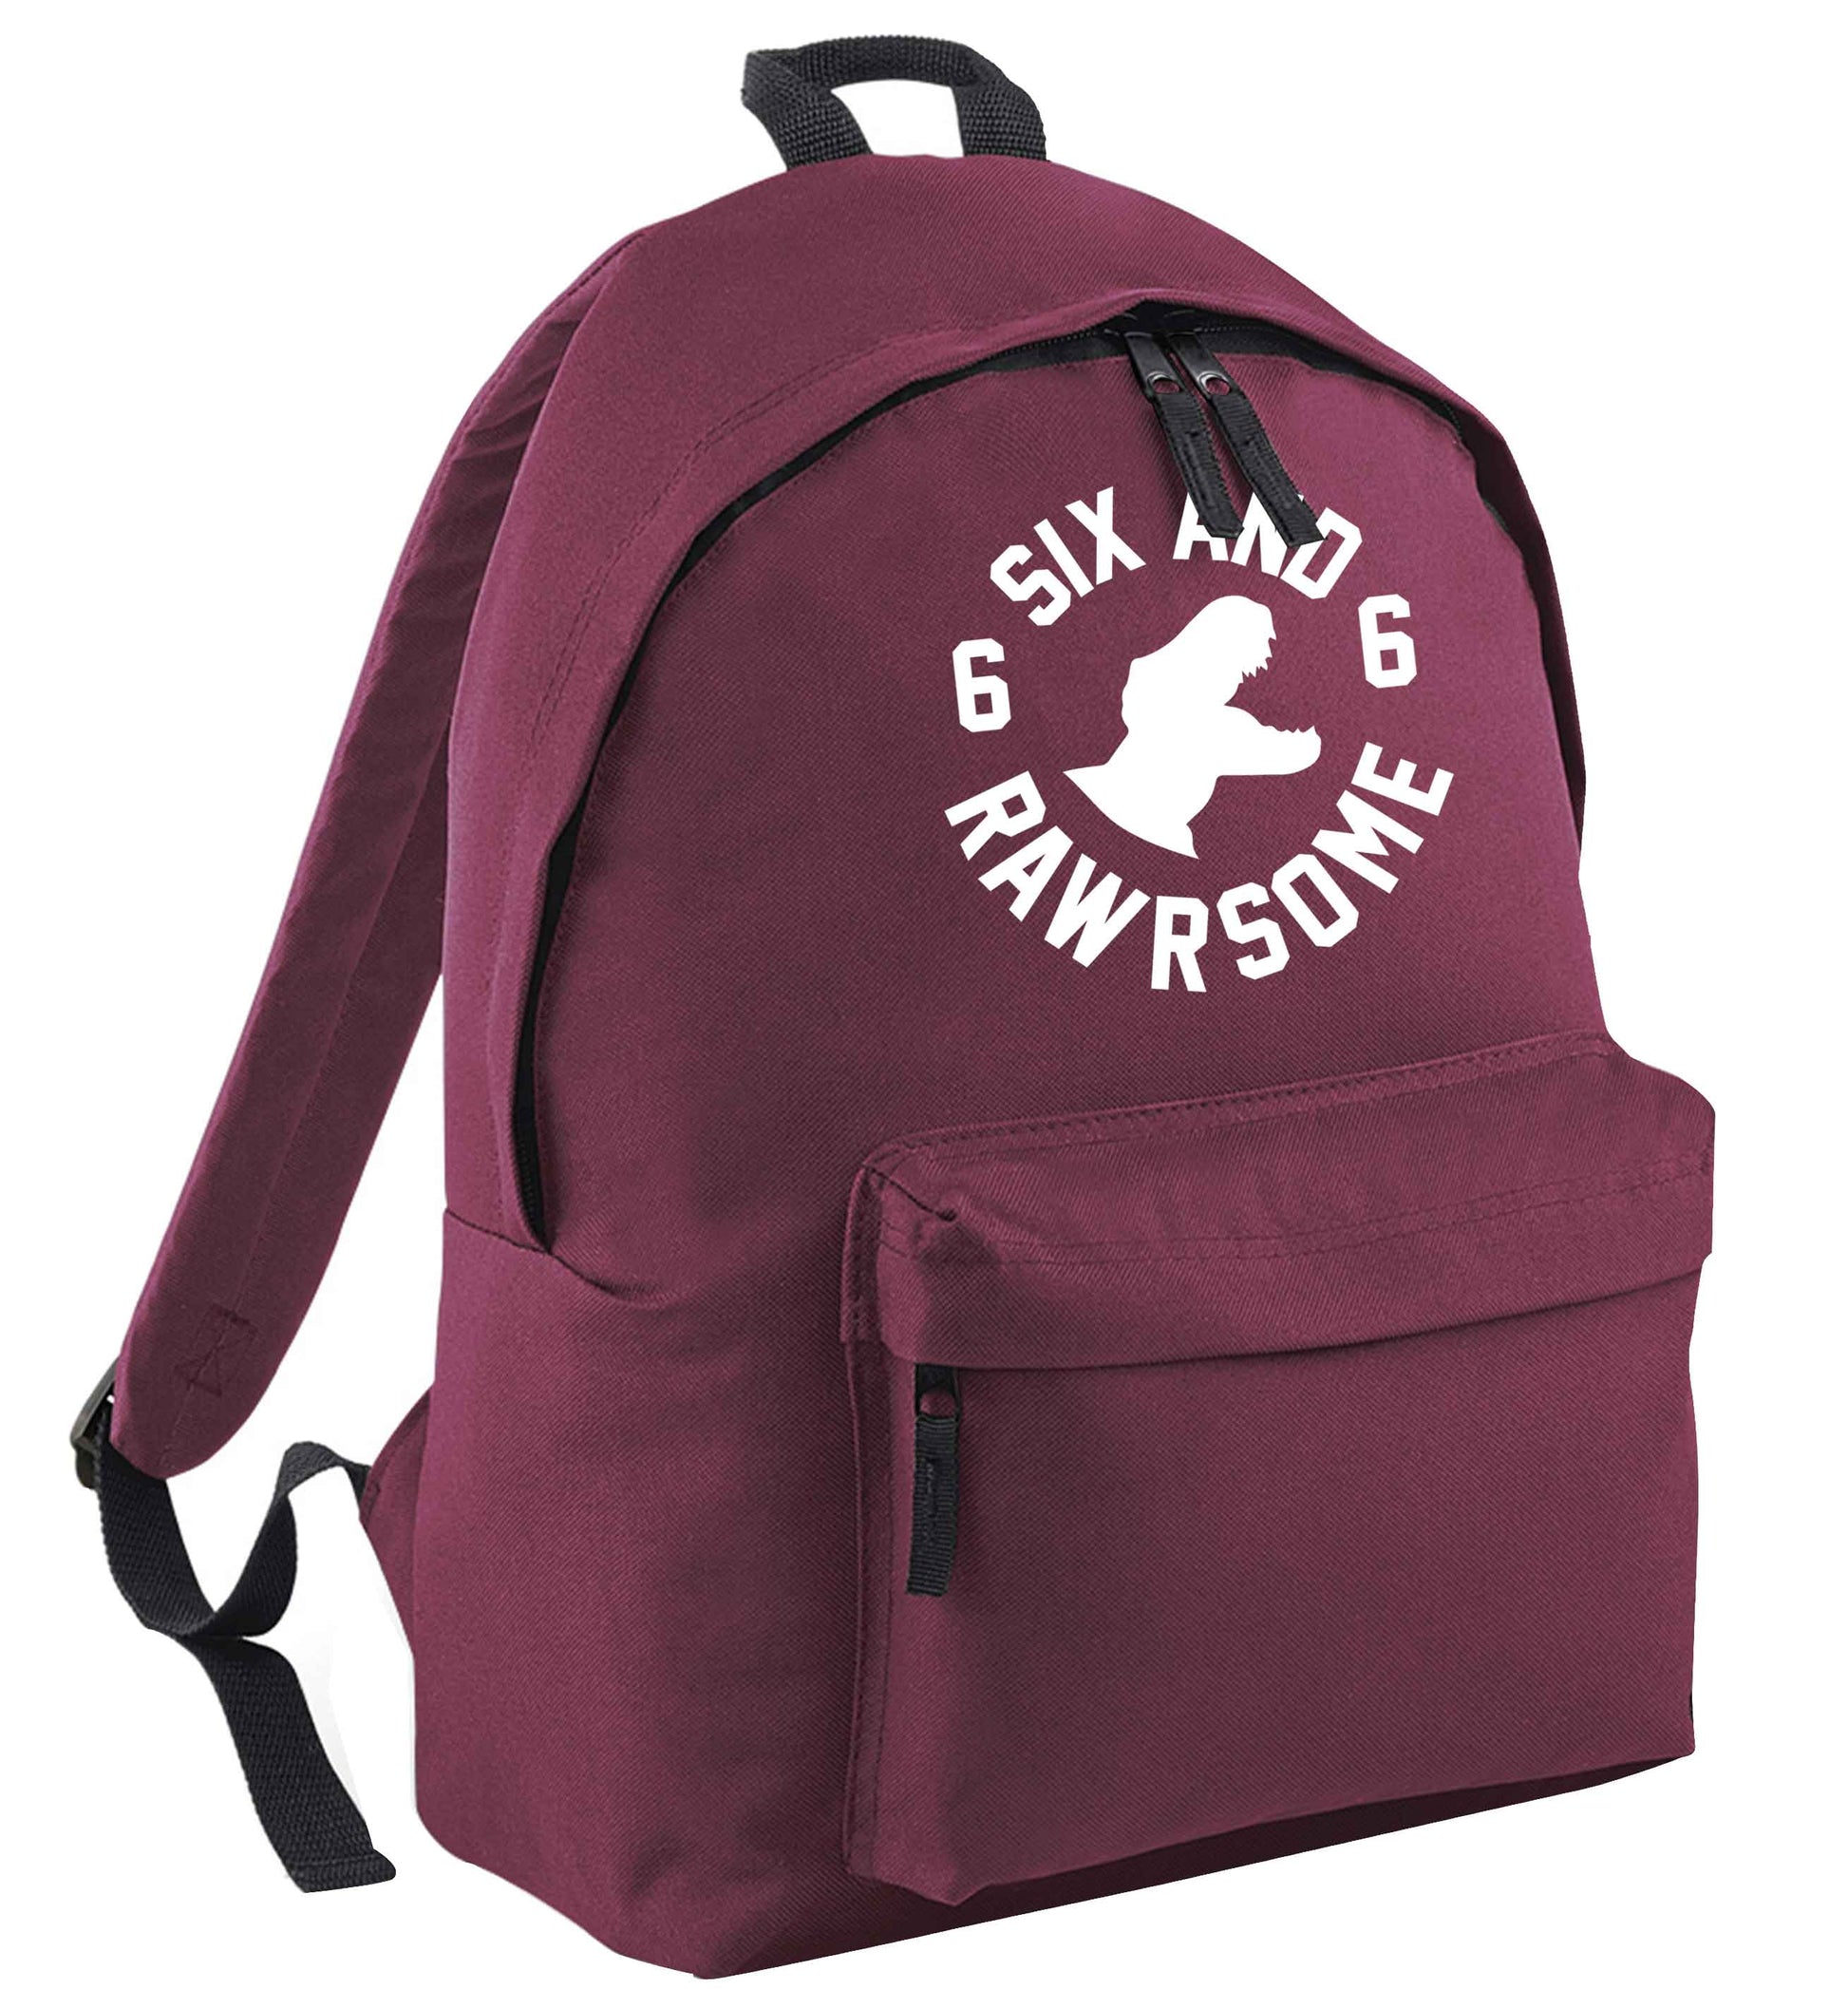 Six and rawrsome black adults backpack